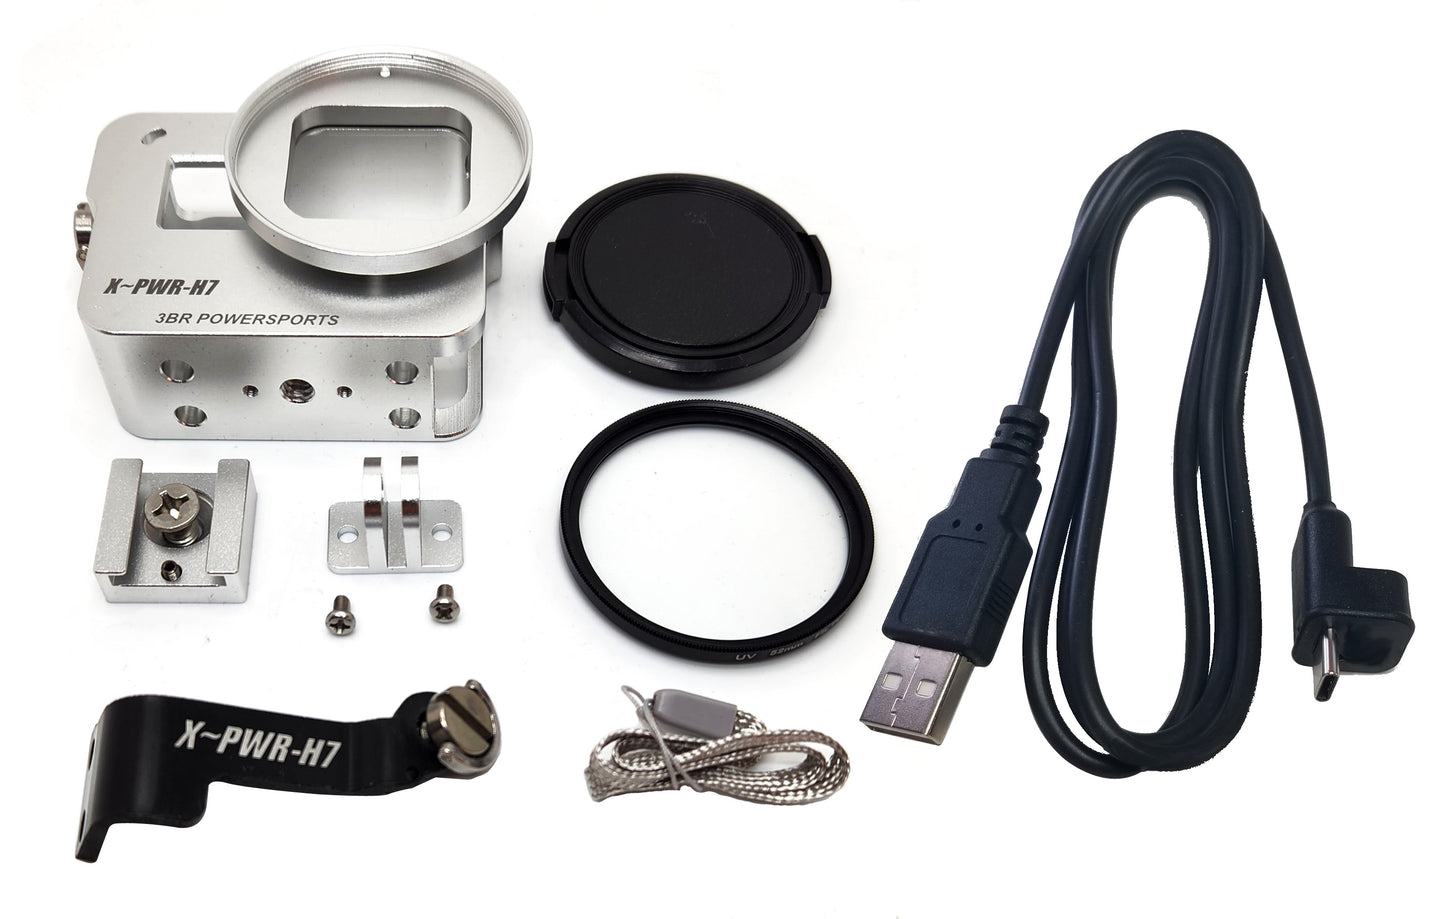 X~PWR H7/SW7 External Power Kit with Silver Housing